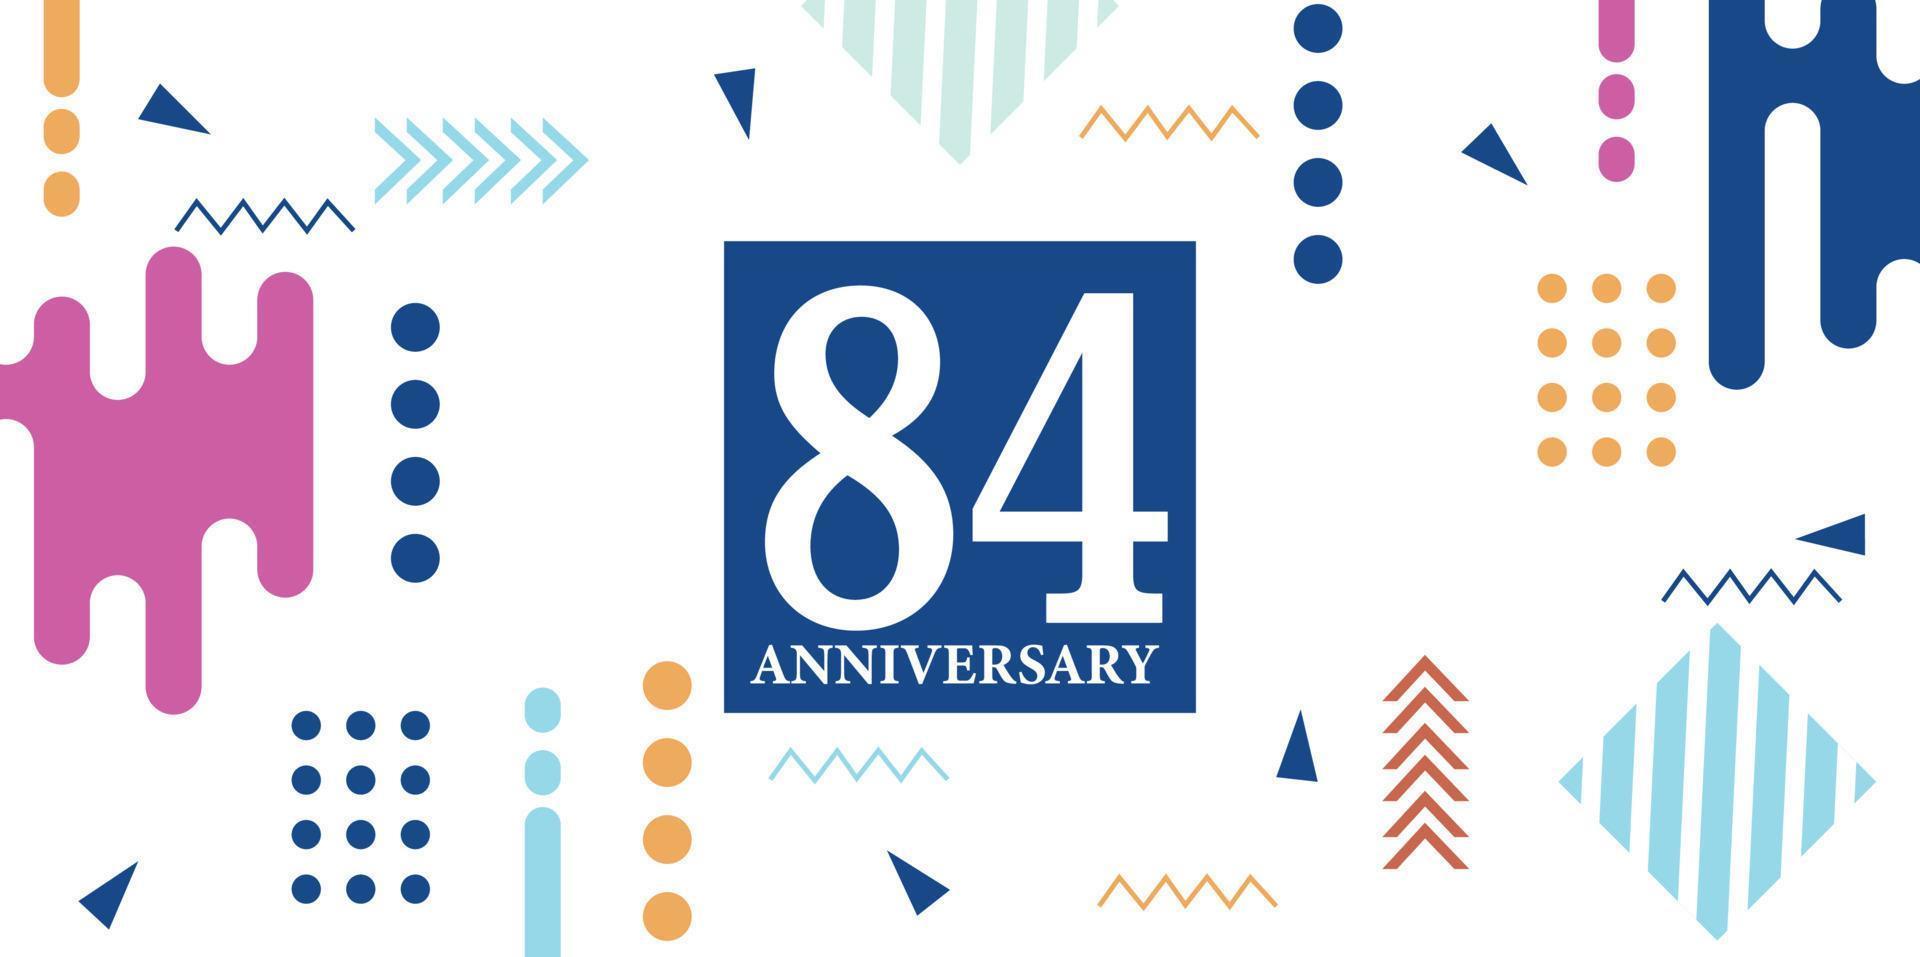 84 years anniversary celebration logotype white numbers font in blue shape with colorful abstract design on white background vector illustration